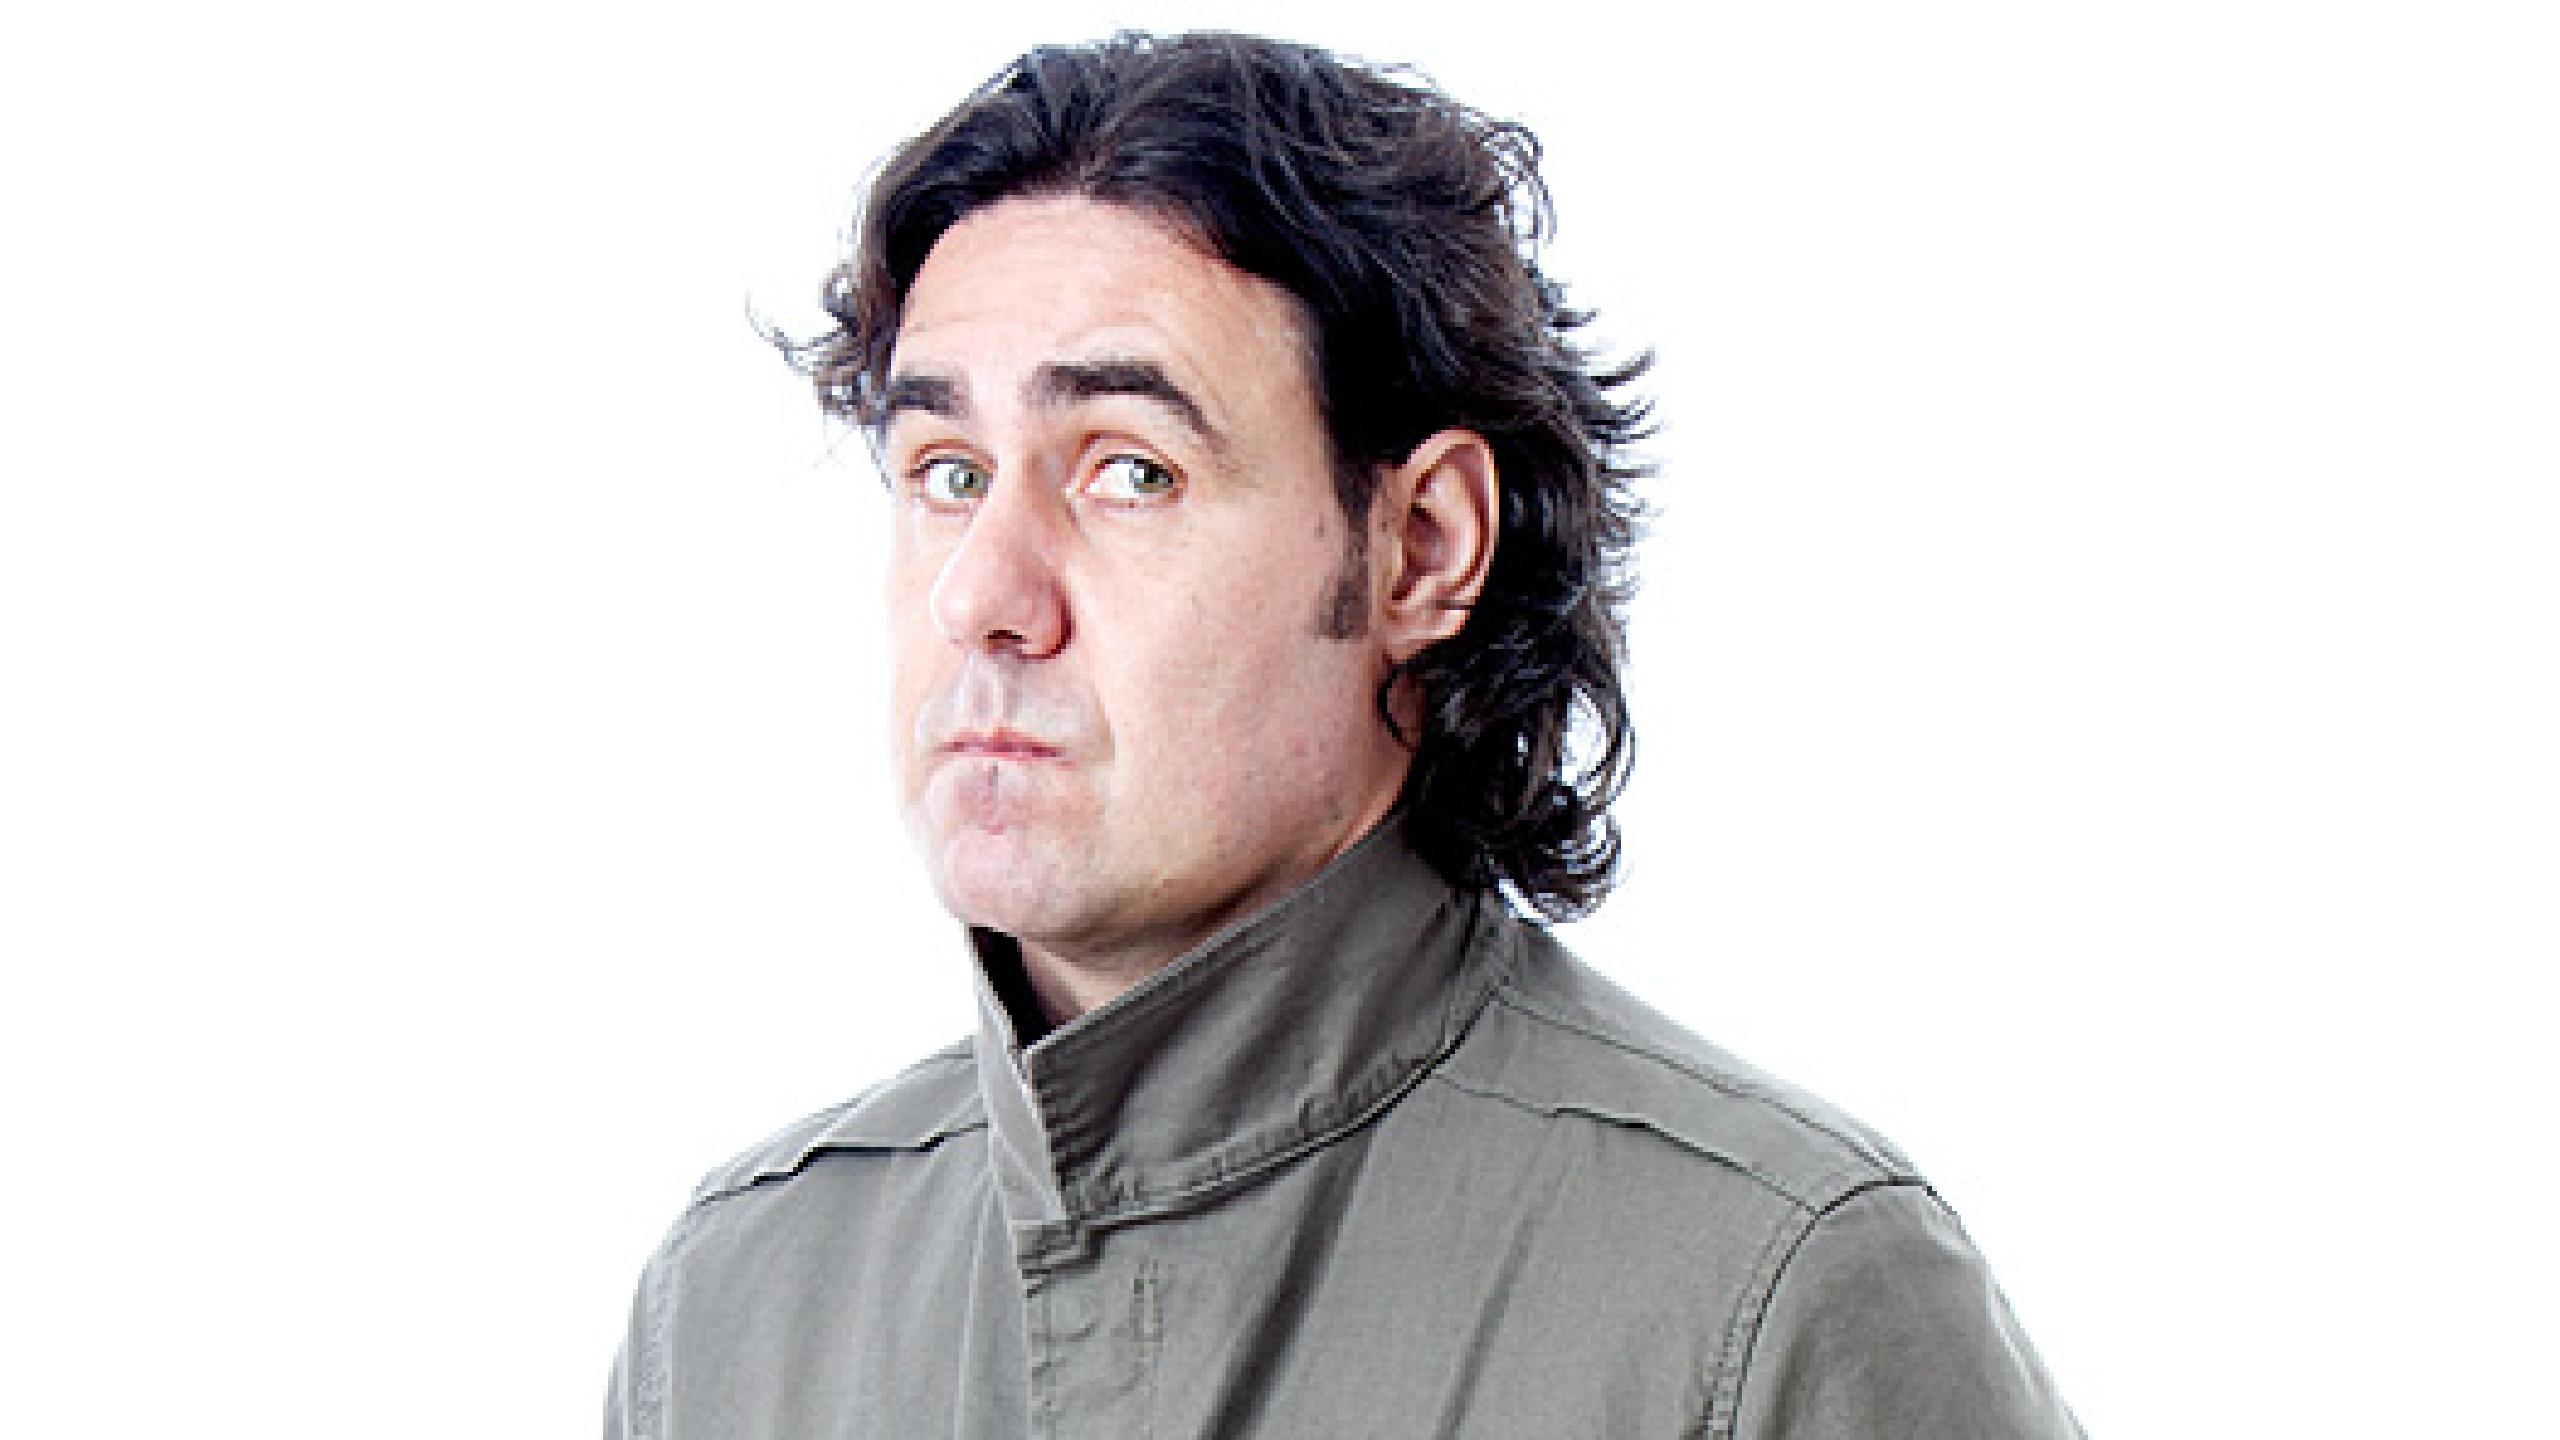 micky flanagan tour end time